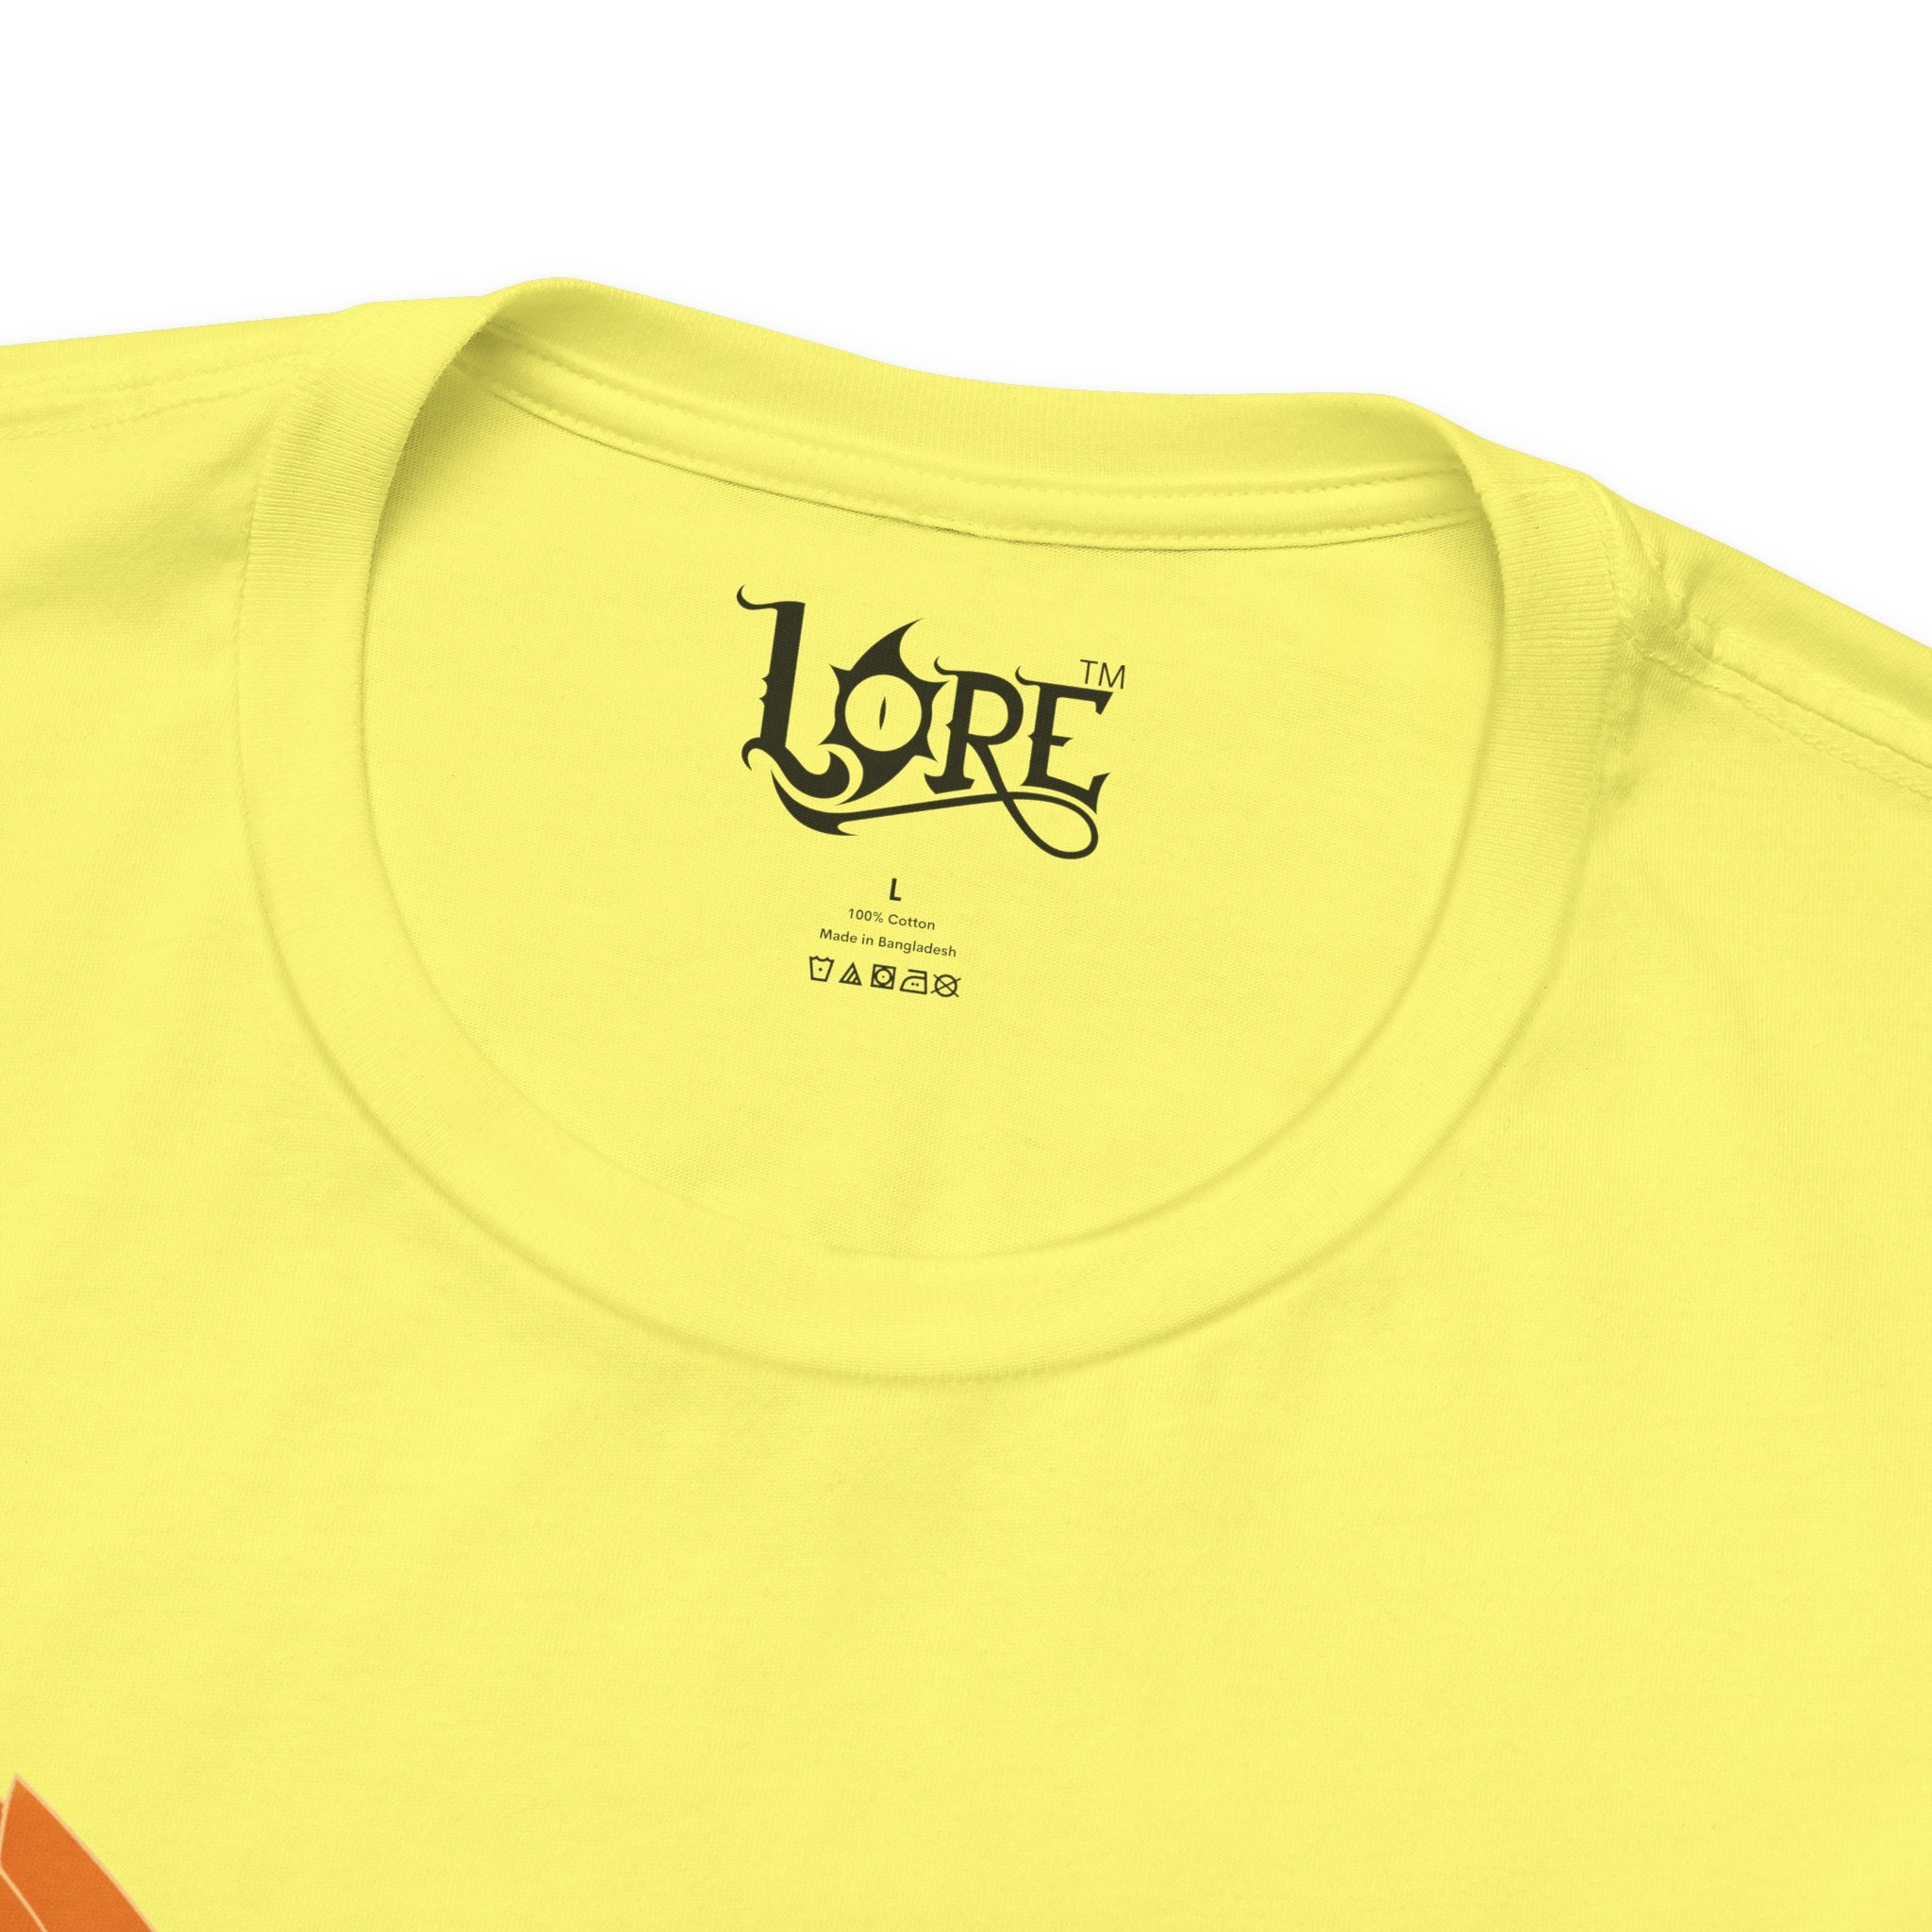 CLERIC CHARACTER T-SHIRT